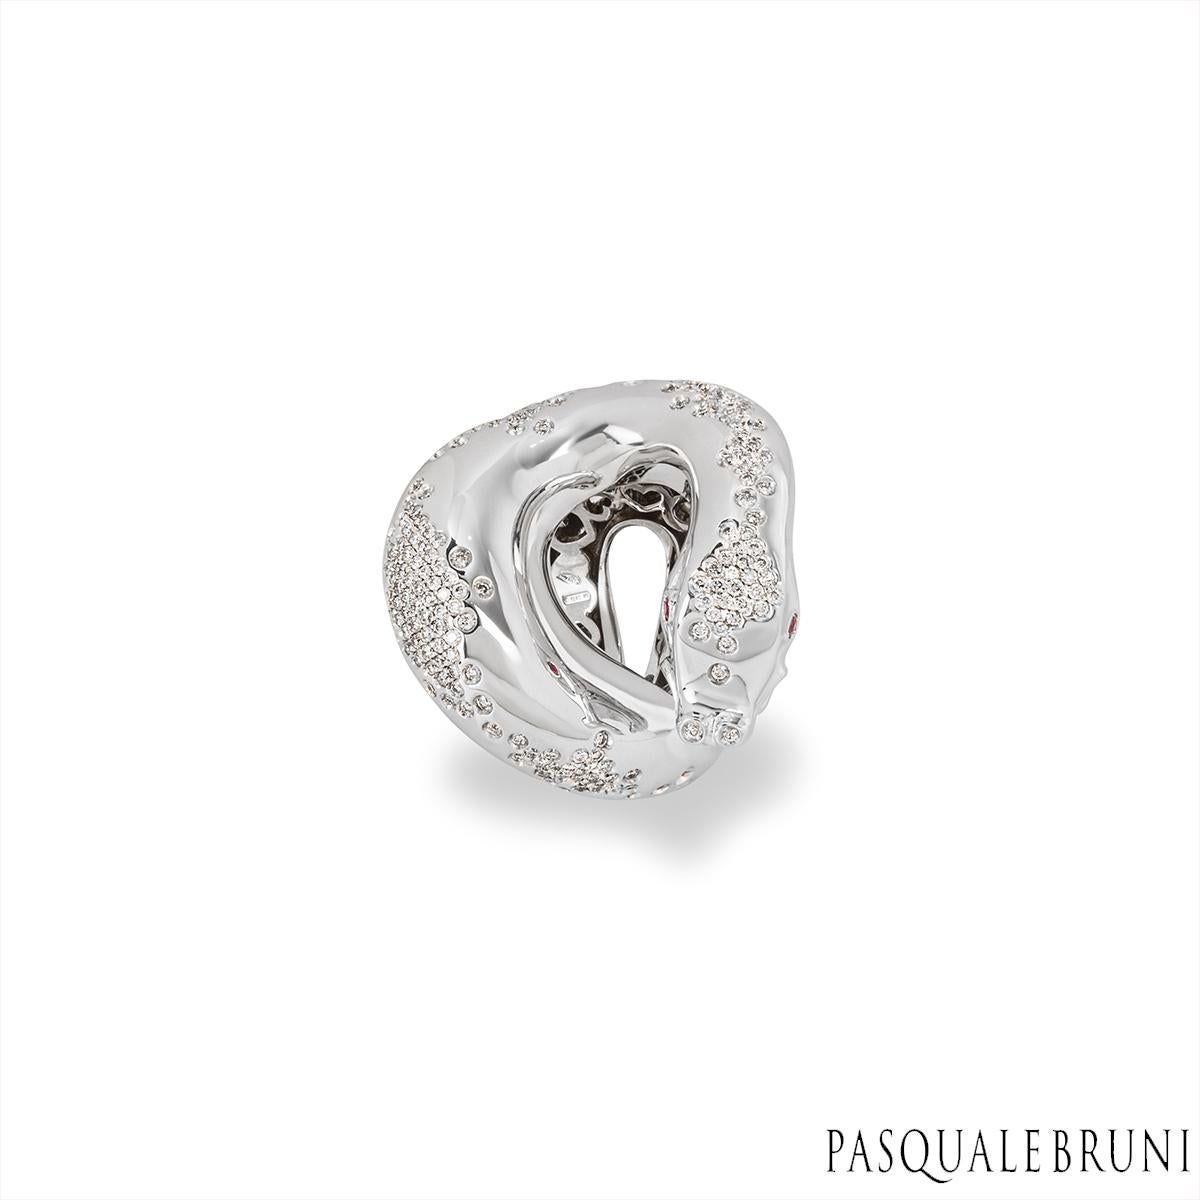 An enchanting 18k white gold diamond ring by Pasquale Bruni from the IL Peccato collection. The ring displays a snake motif that coils around the finger featuring 2 round ruby set eyes. Cascading down the back of the snake are 191 round brilliant